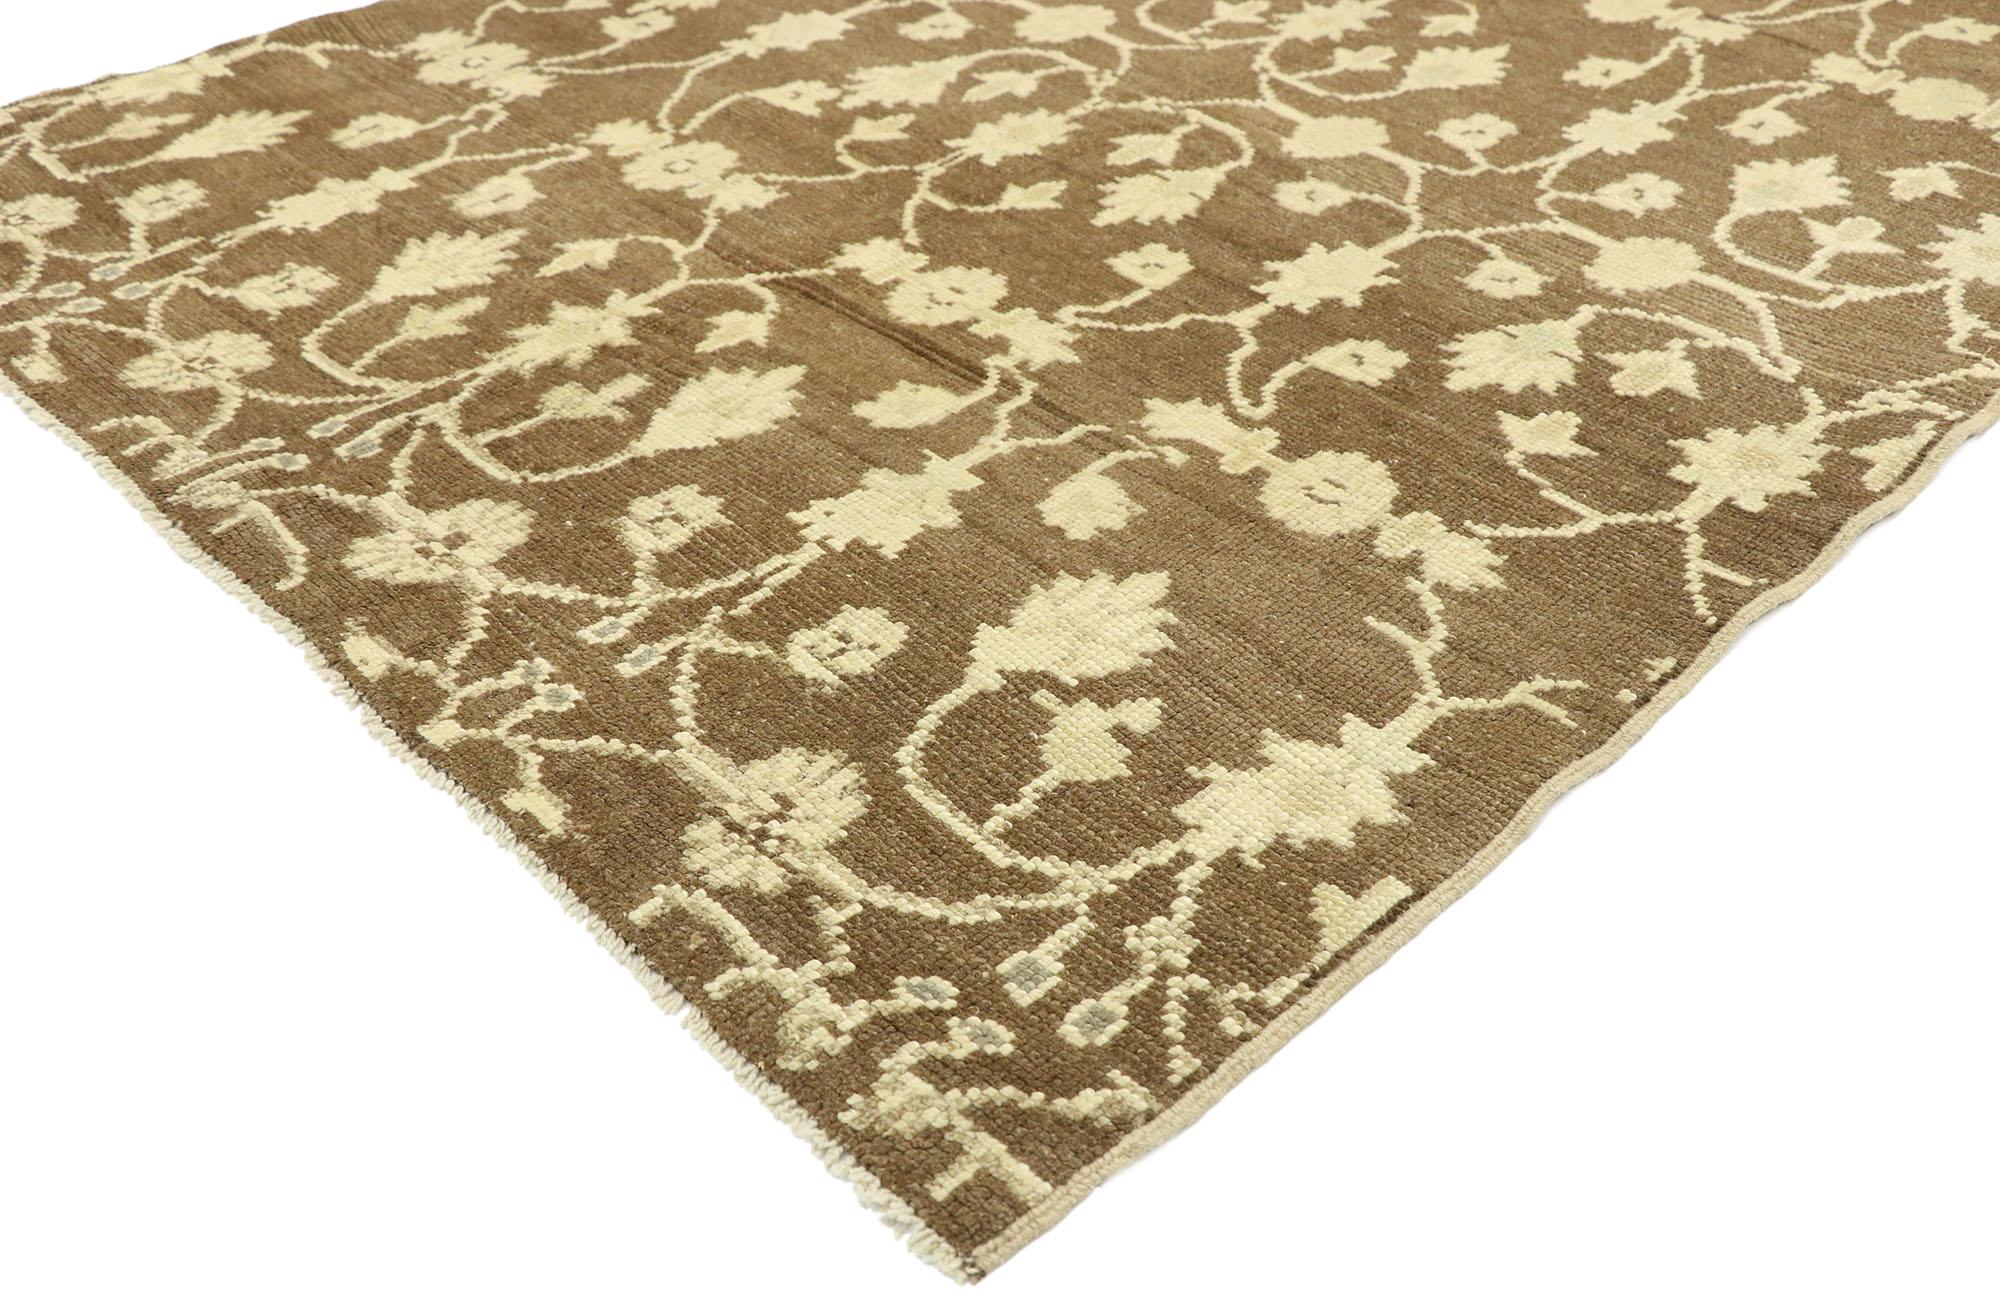 52991 vintage Turkish Oushak rug with Swedish Farmhouse Cottage style. Representing a stylish union of traditional and sophisticated chic, this hand knotted wool vintage Turkish Oushak rug provides an elegant and genteel design aesthetic with soft